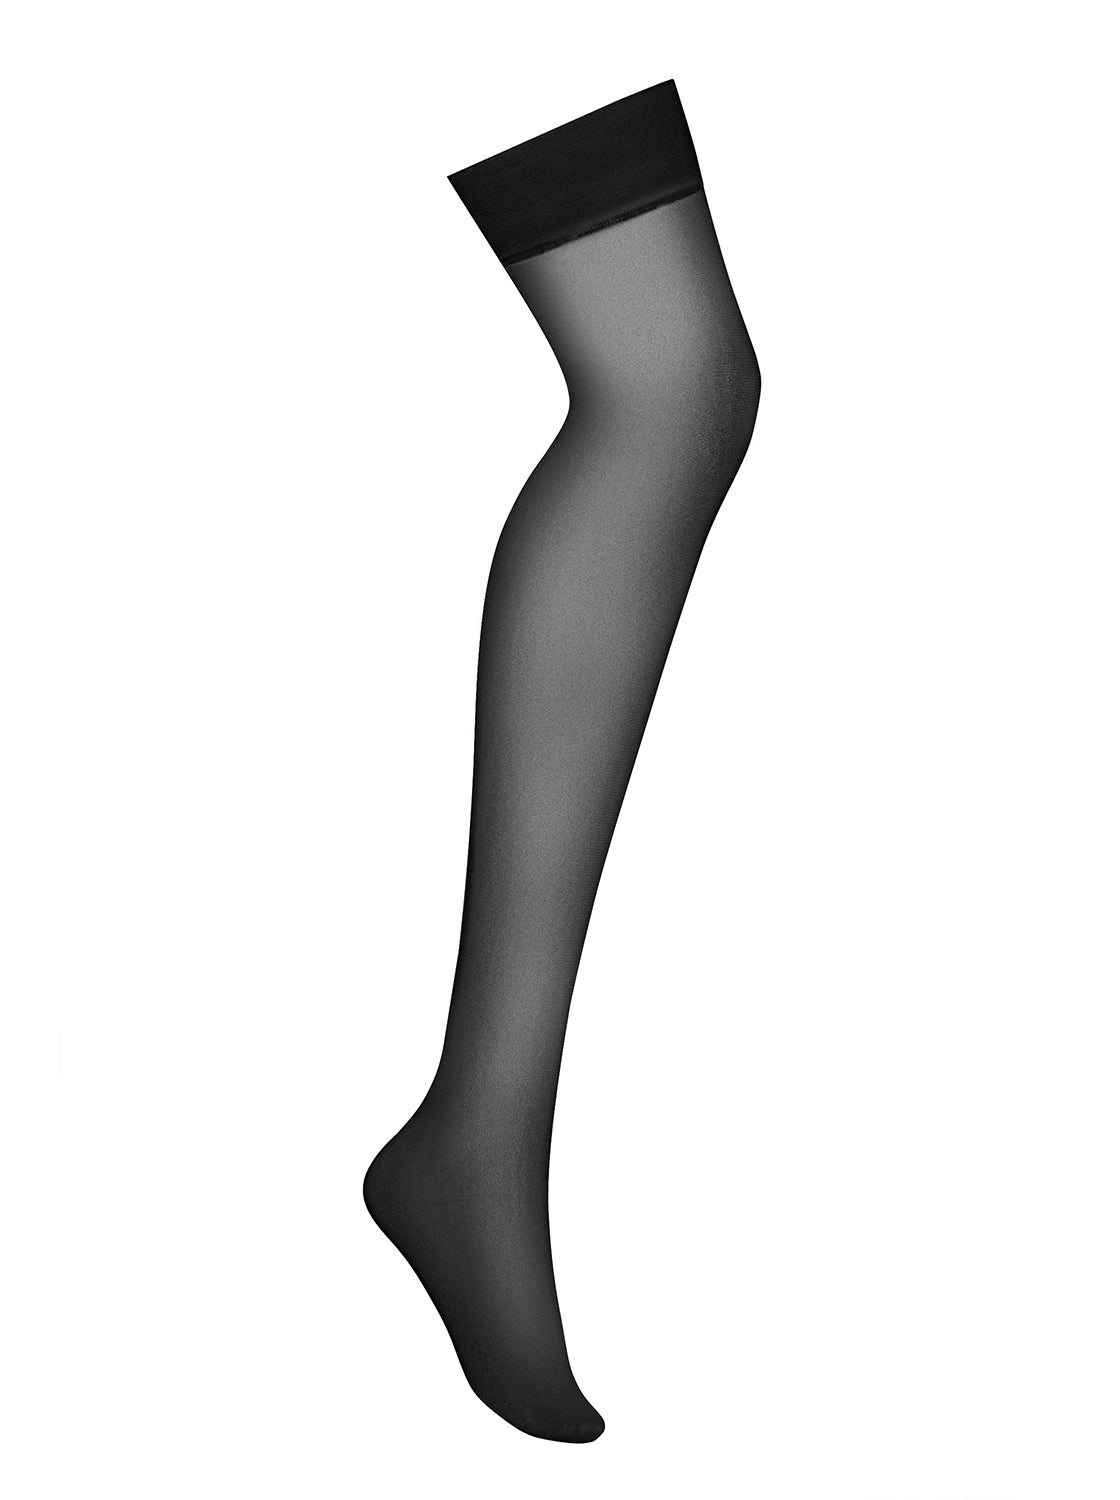 Sheer Stockings S800 Black - Just for you desires